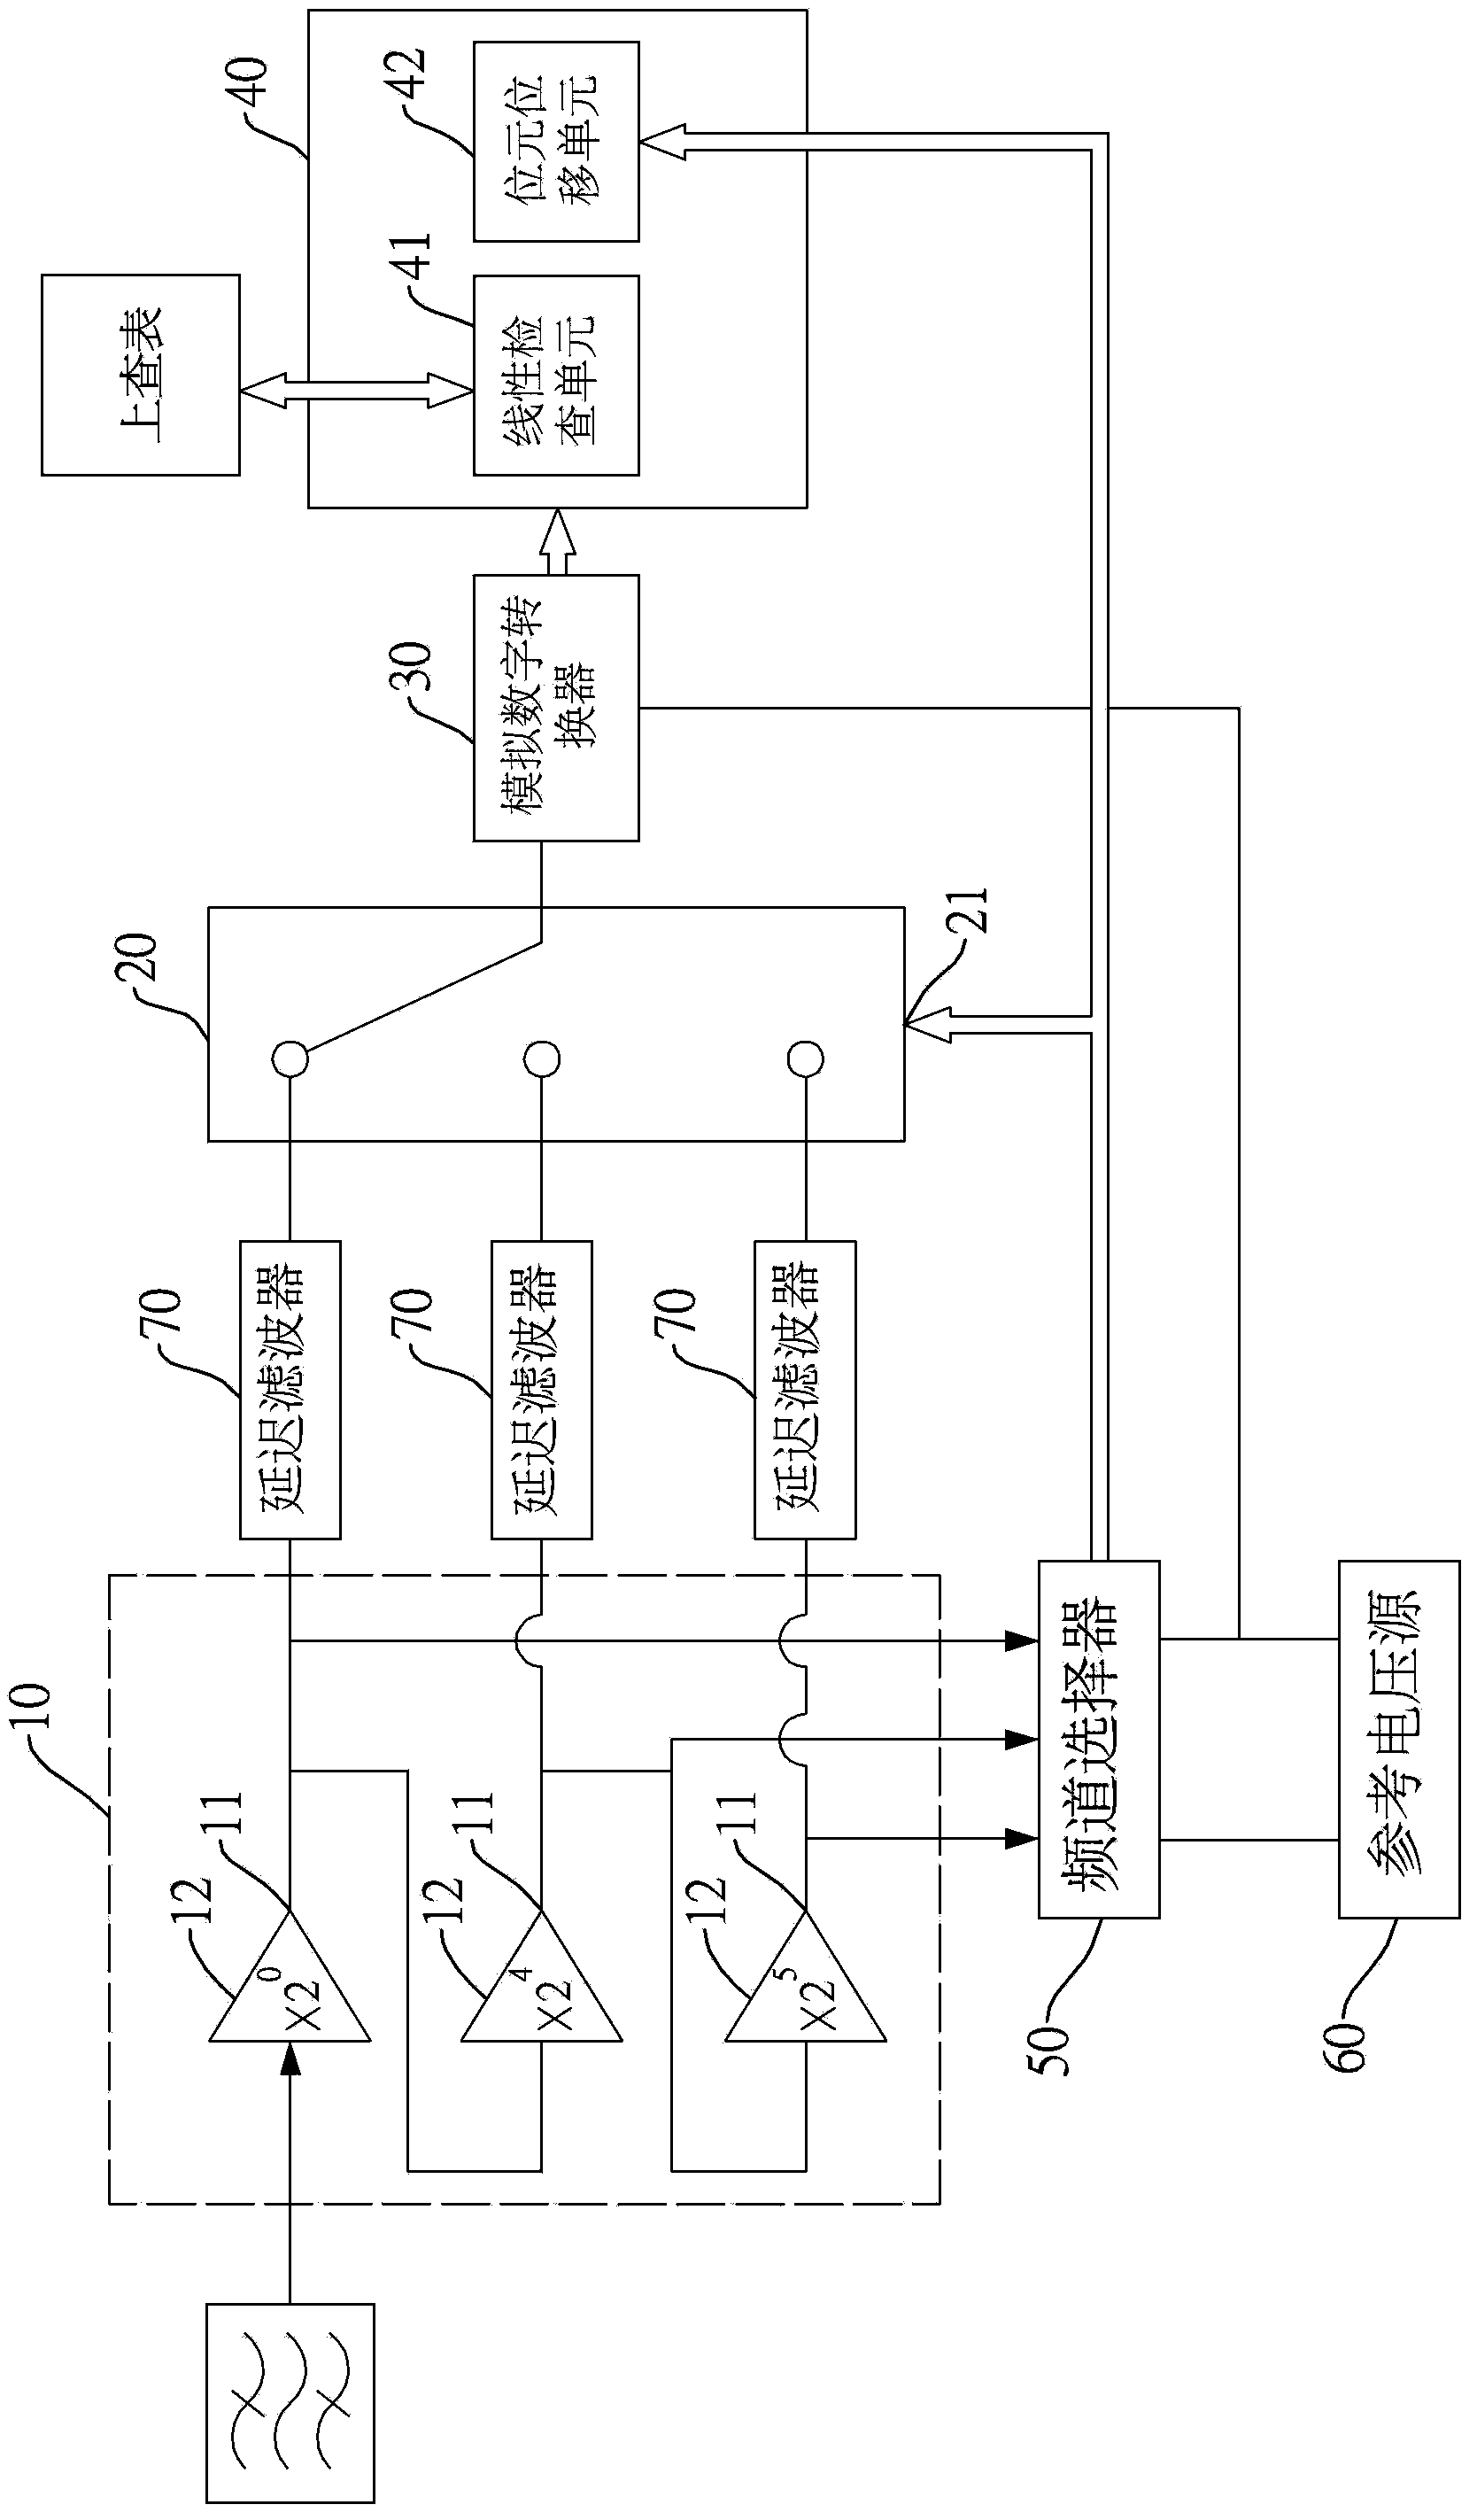 Bit extending system and bit extending method for analog-to-digital conversion